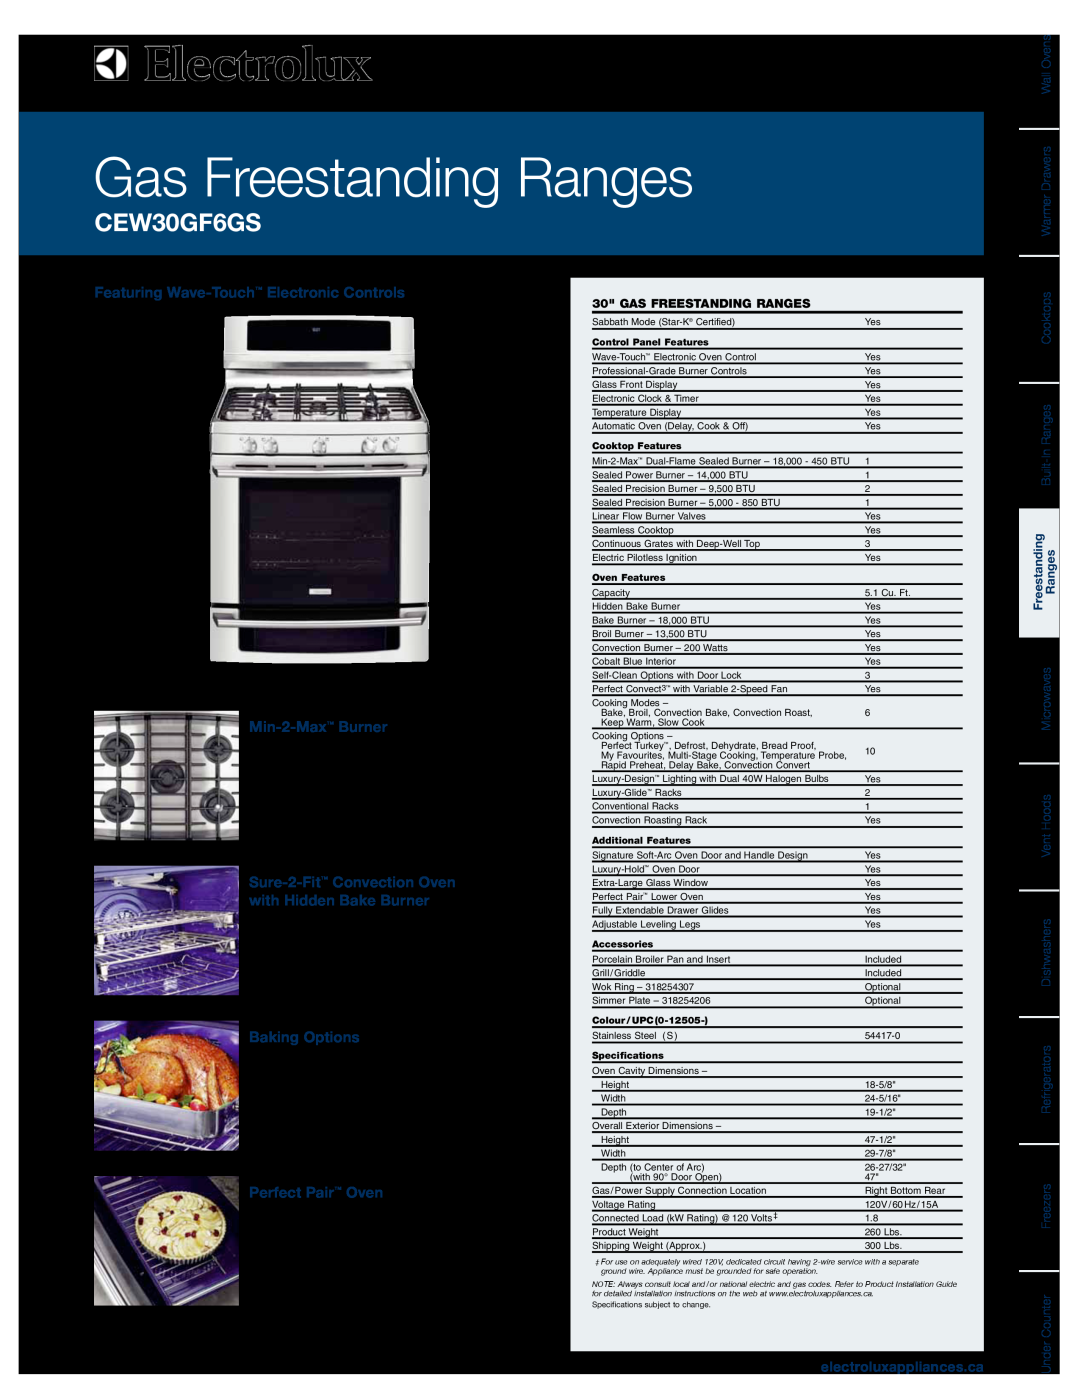 Electrolux CEW30GF6GS manual Featuring Wave-Touch Electronic Controls, Min-2-Max Burner, Baking Options, Perfect Pair Oven 